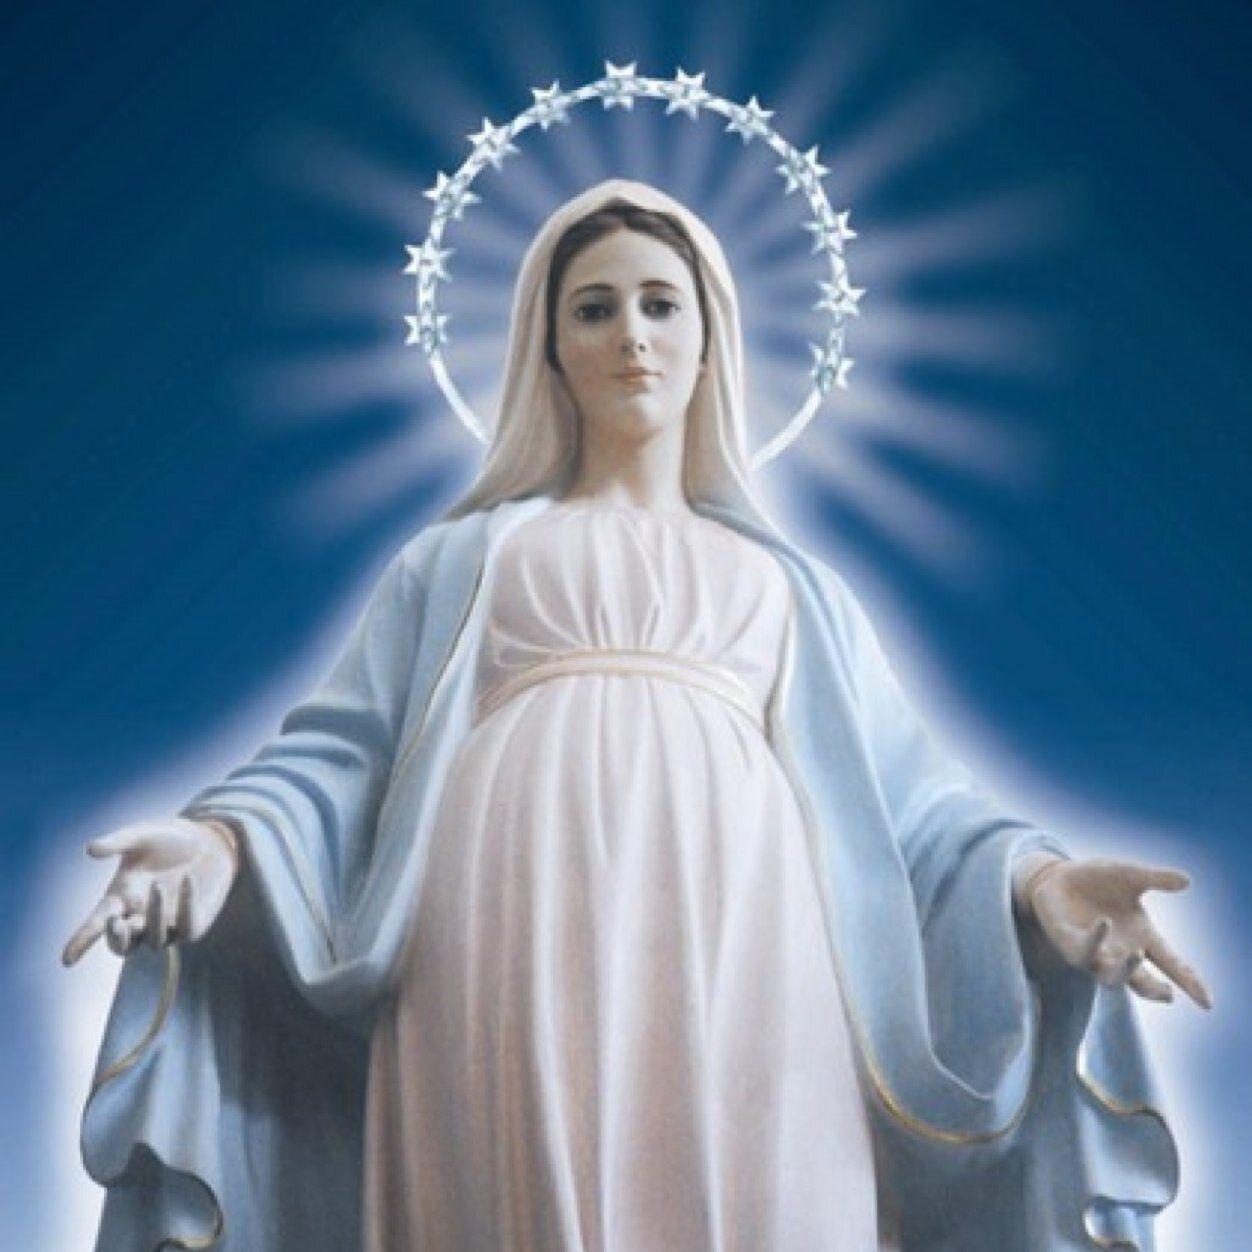 Facts You Need to know about Virgin Mary